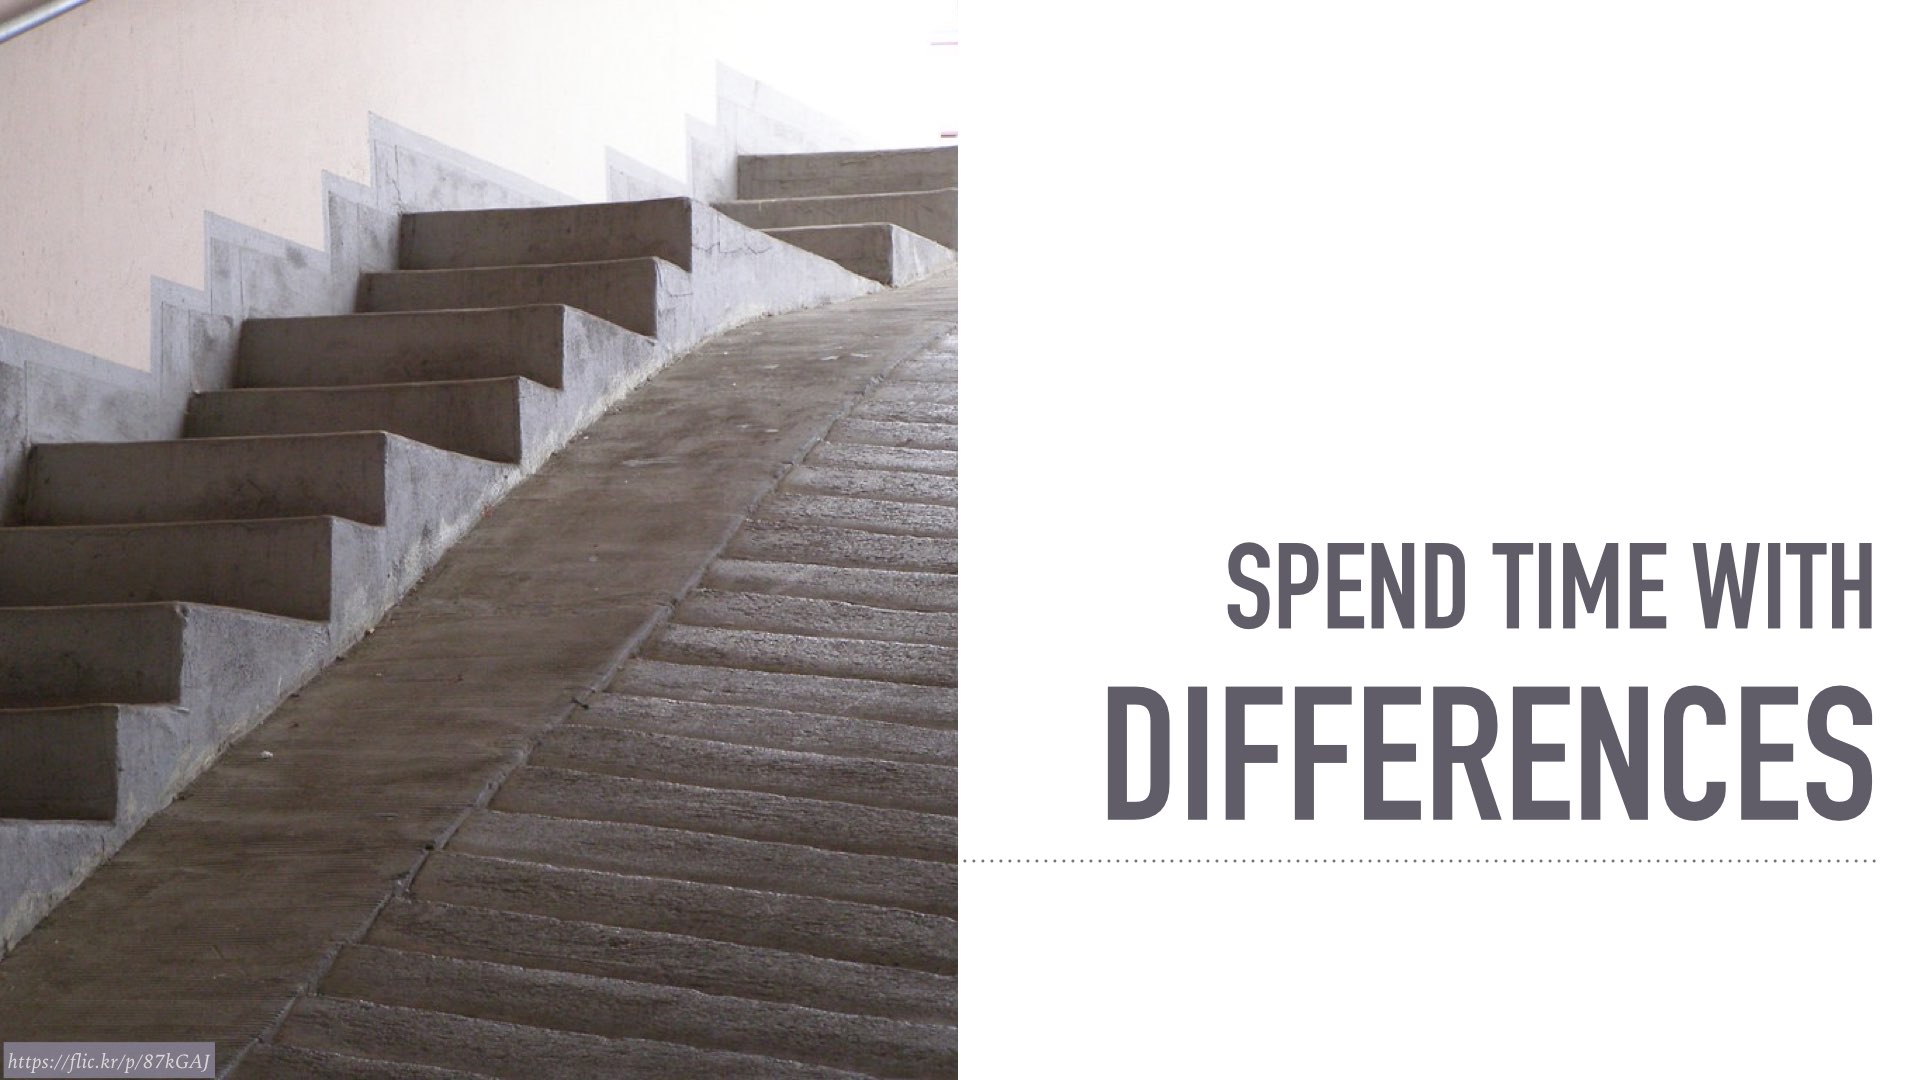 Spend time with differences